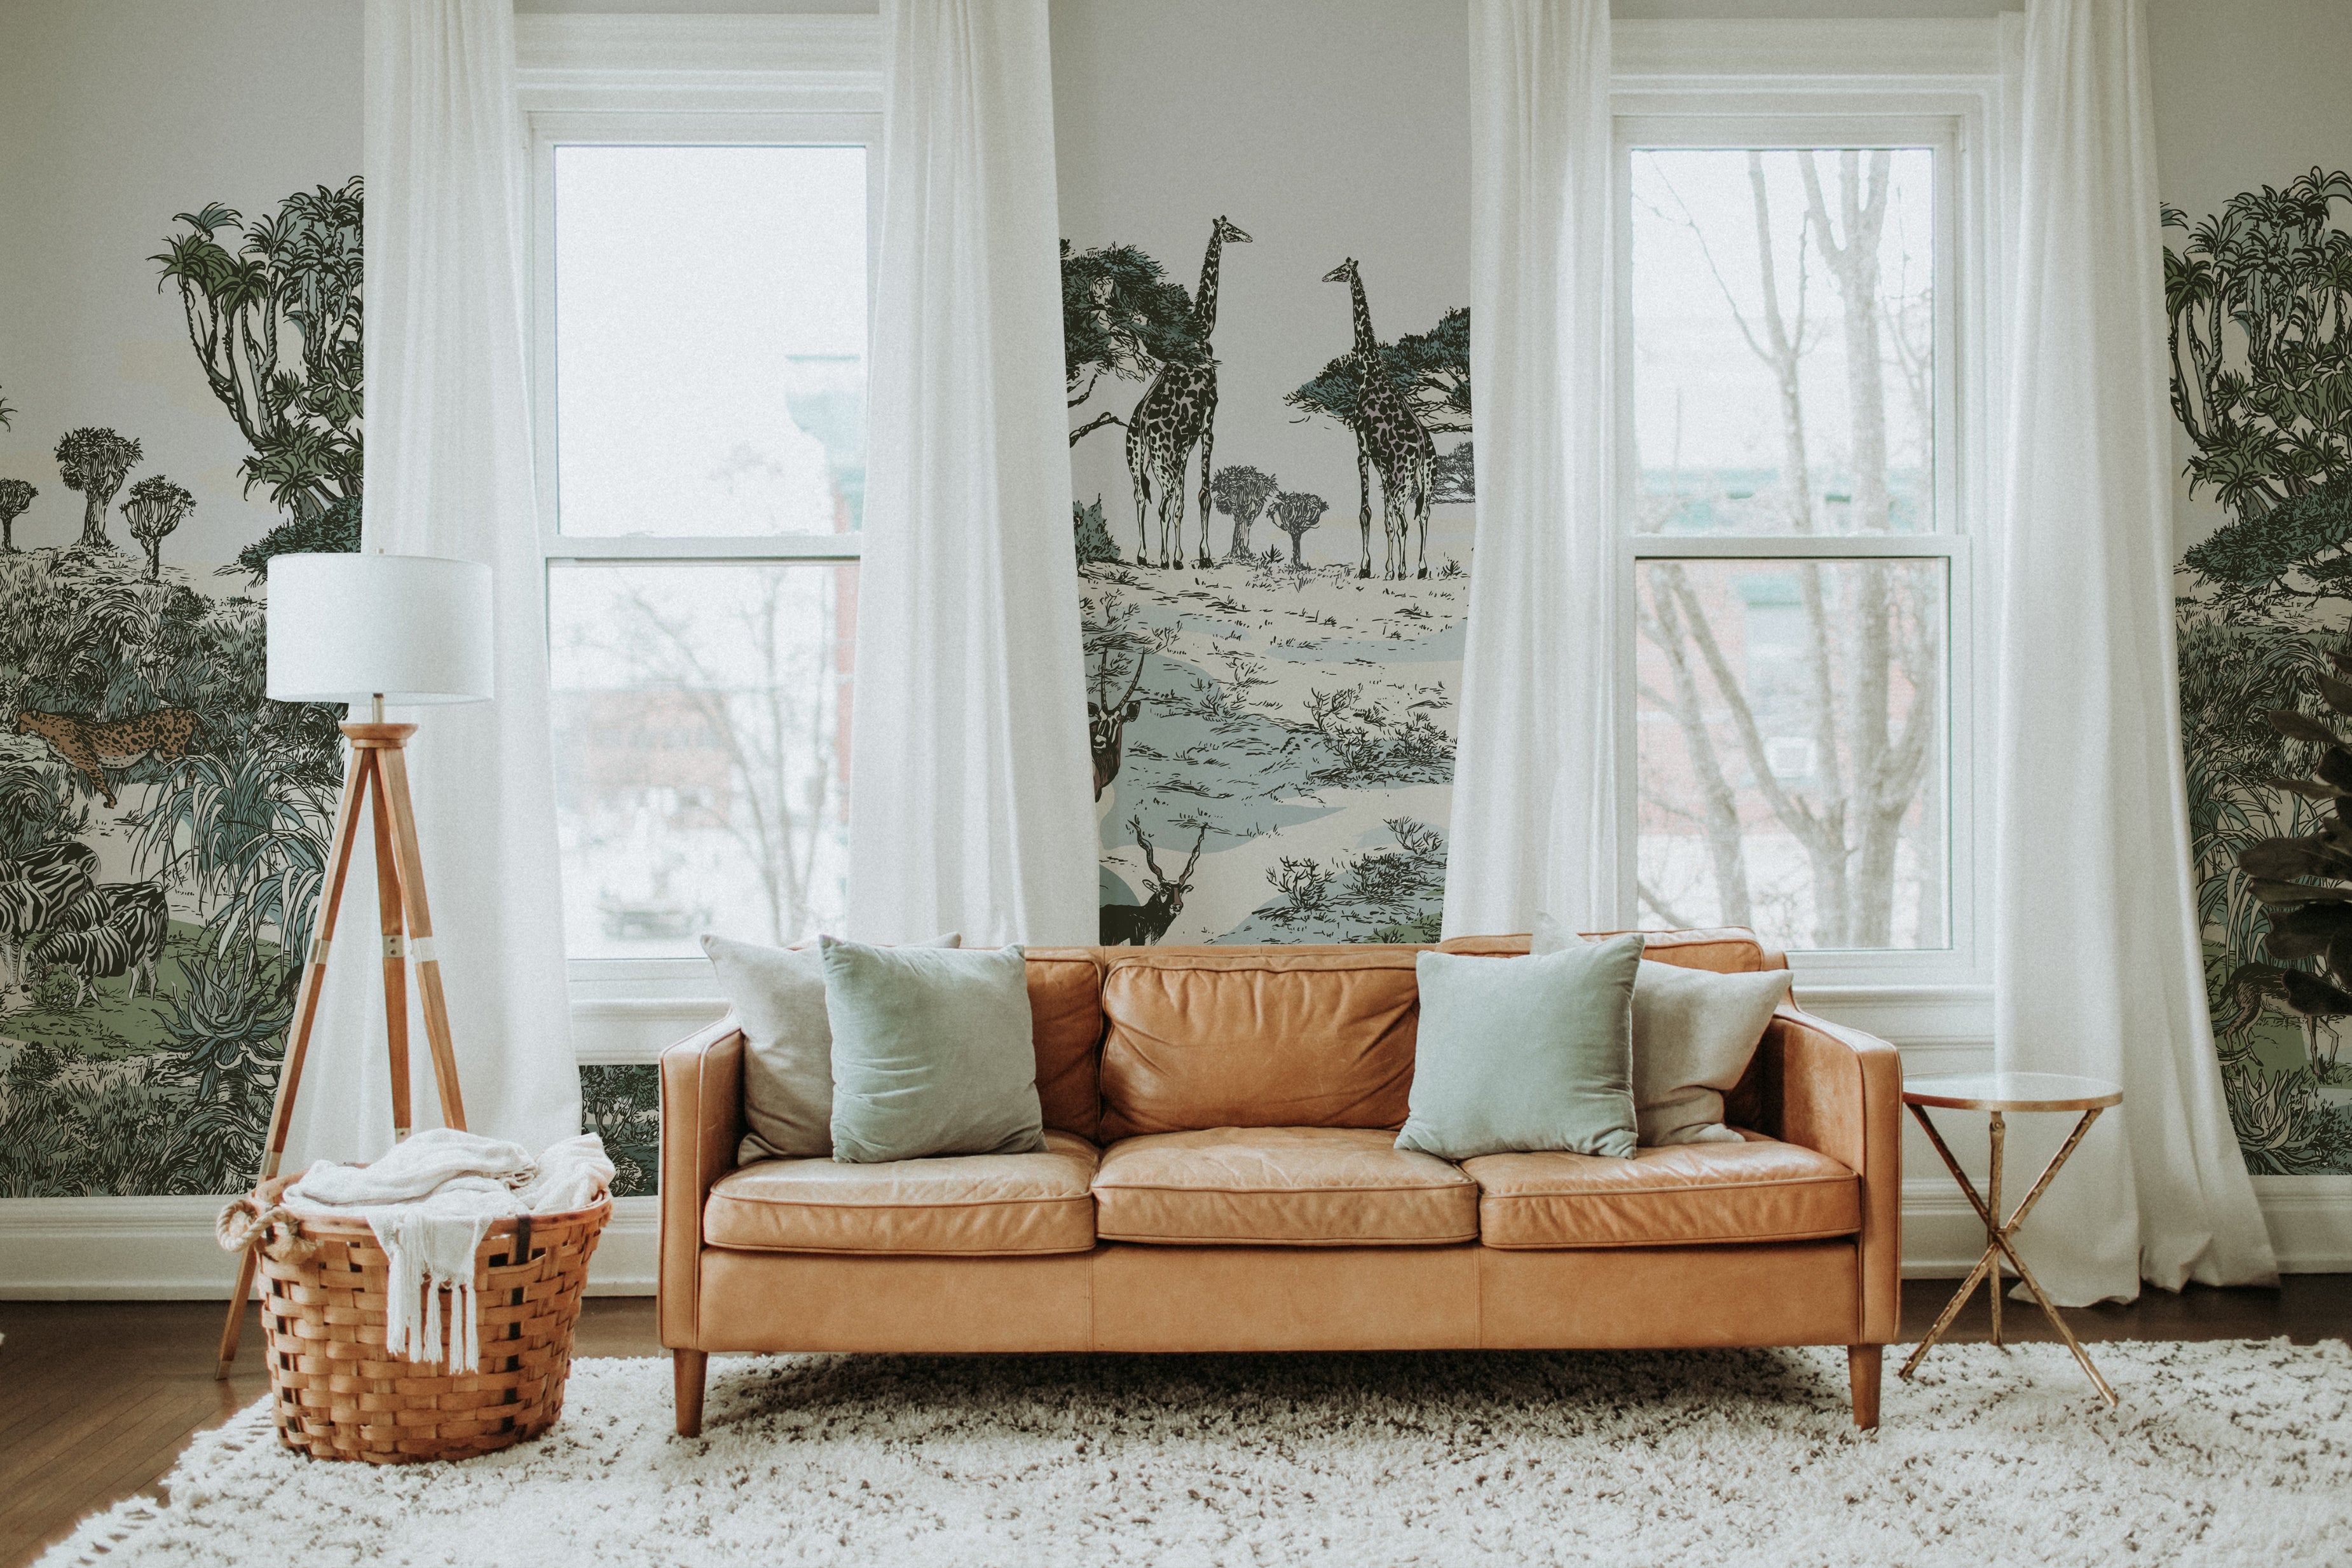 A bright living room space with large windows draped in sheer white curtains. A caramel leather couch with mint green pillows sits against a wall adorned with safari-themed wallpaper featuring giraffes and lush vegetation